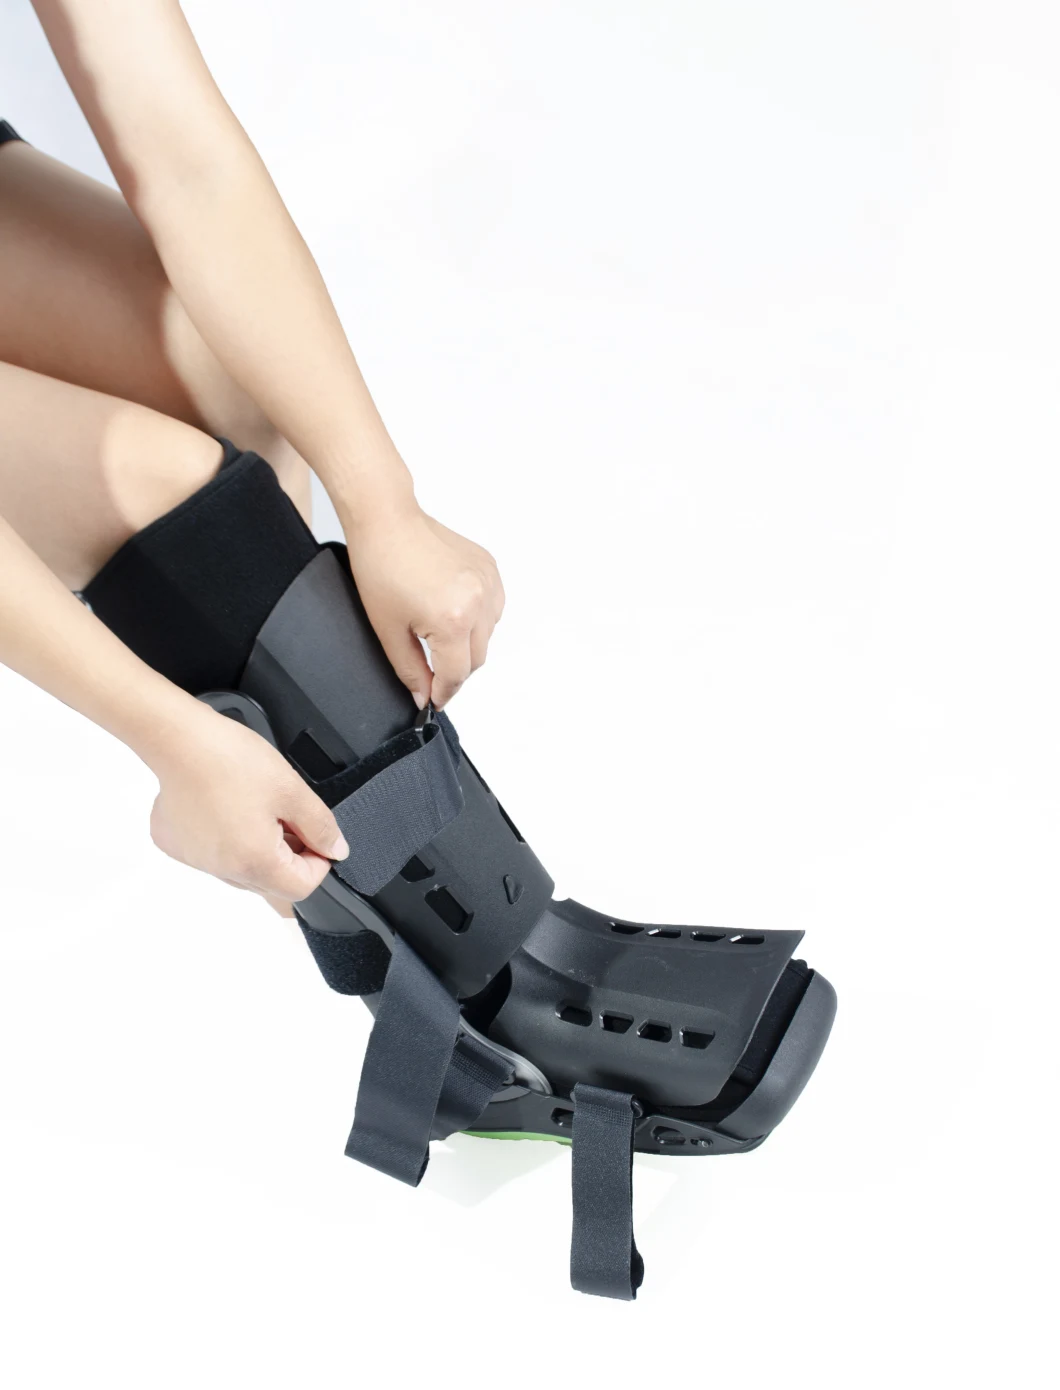 Pneumatic Walker Boots Orthopedic Ankle Cam Walker Brace and Support with Ce FDA